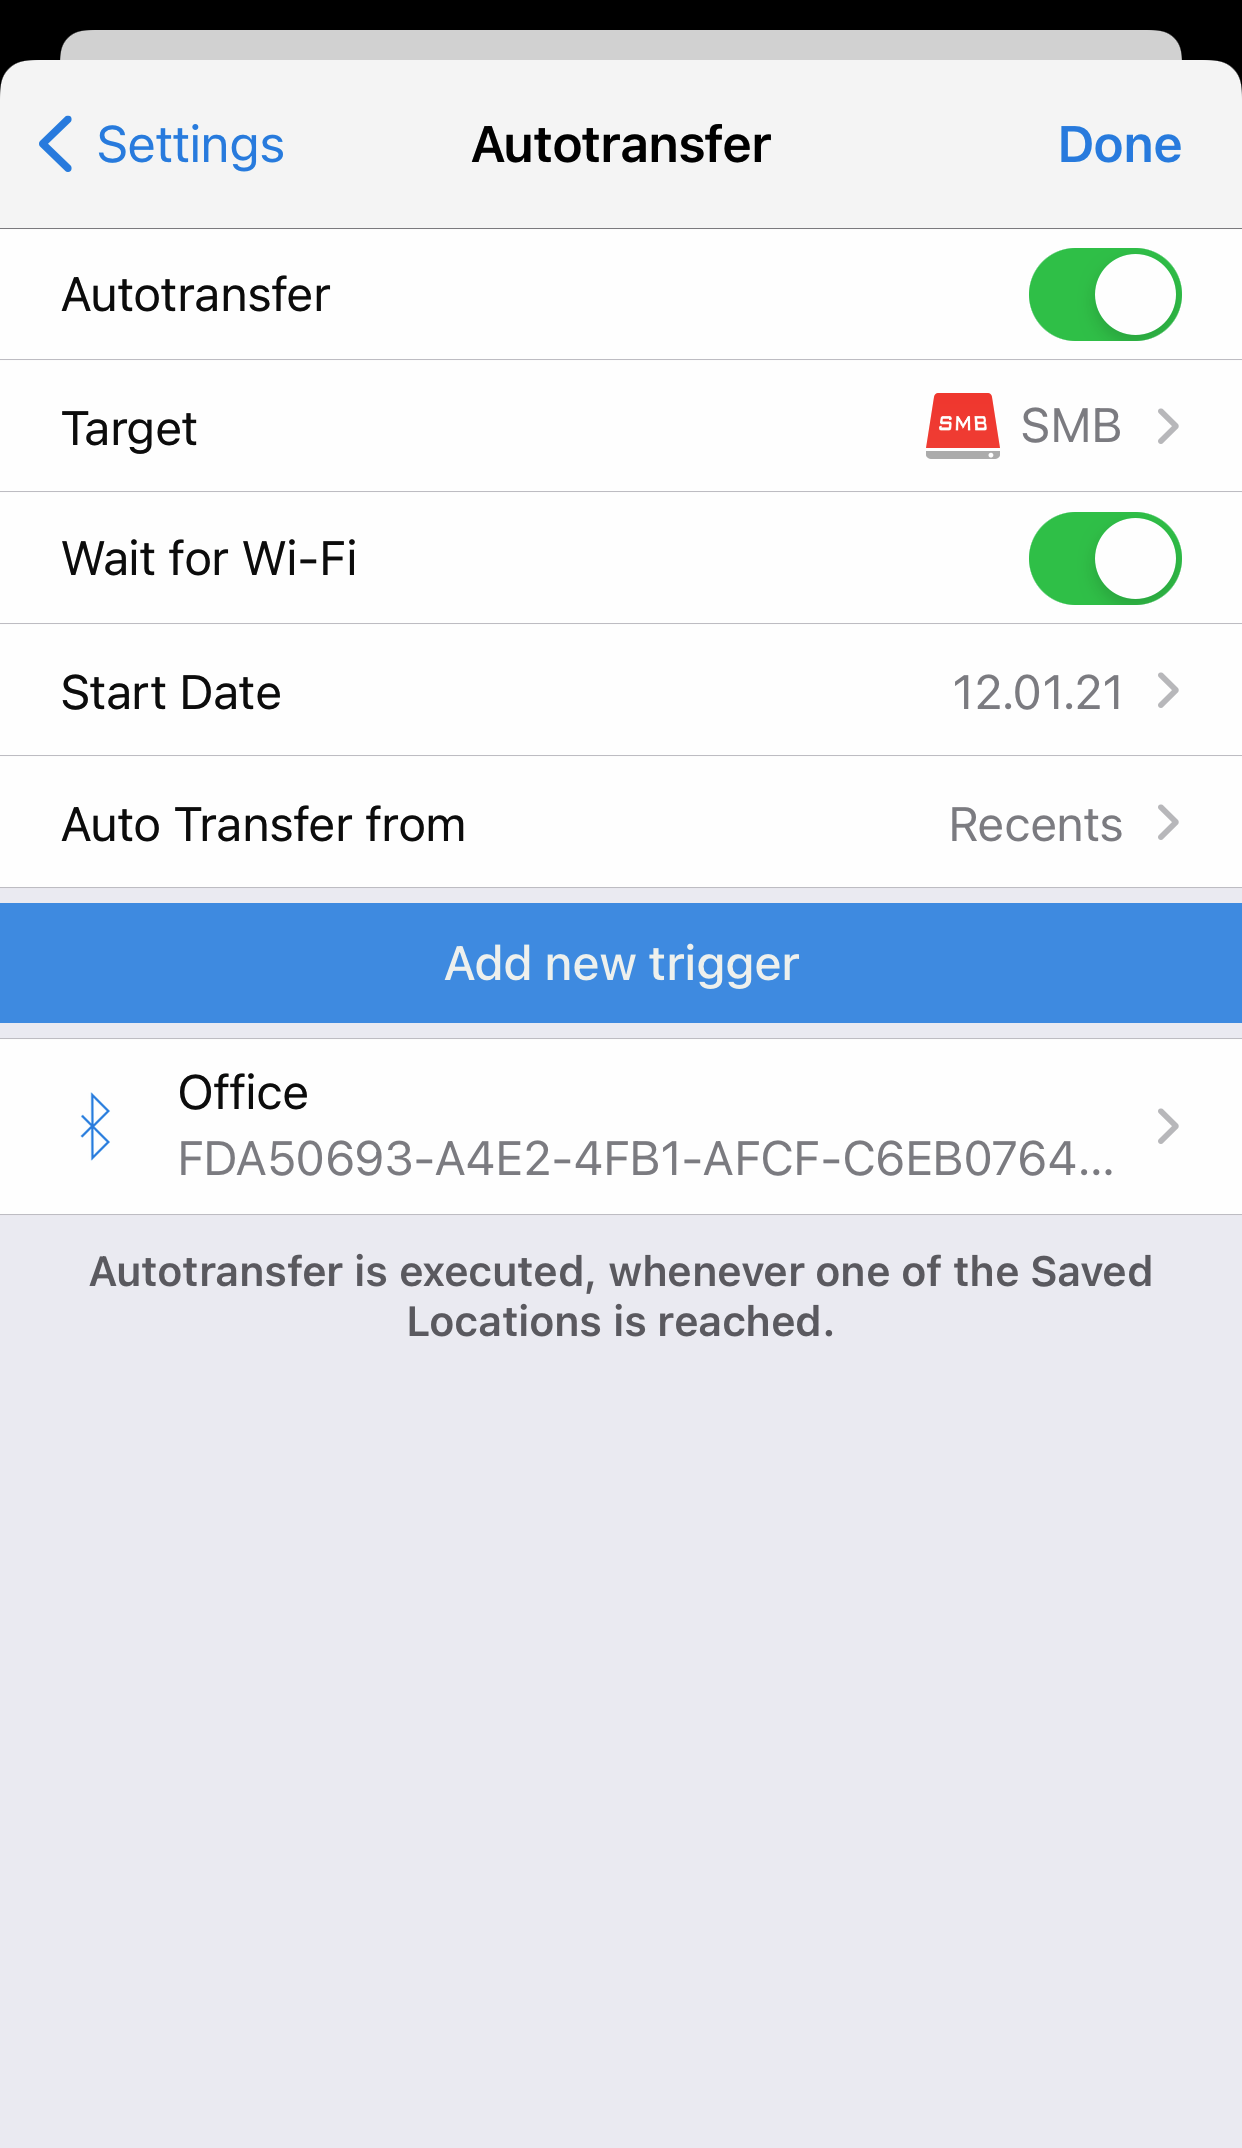 Accepted iBeacon as a trigger for the autotransfer